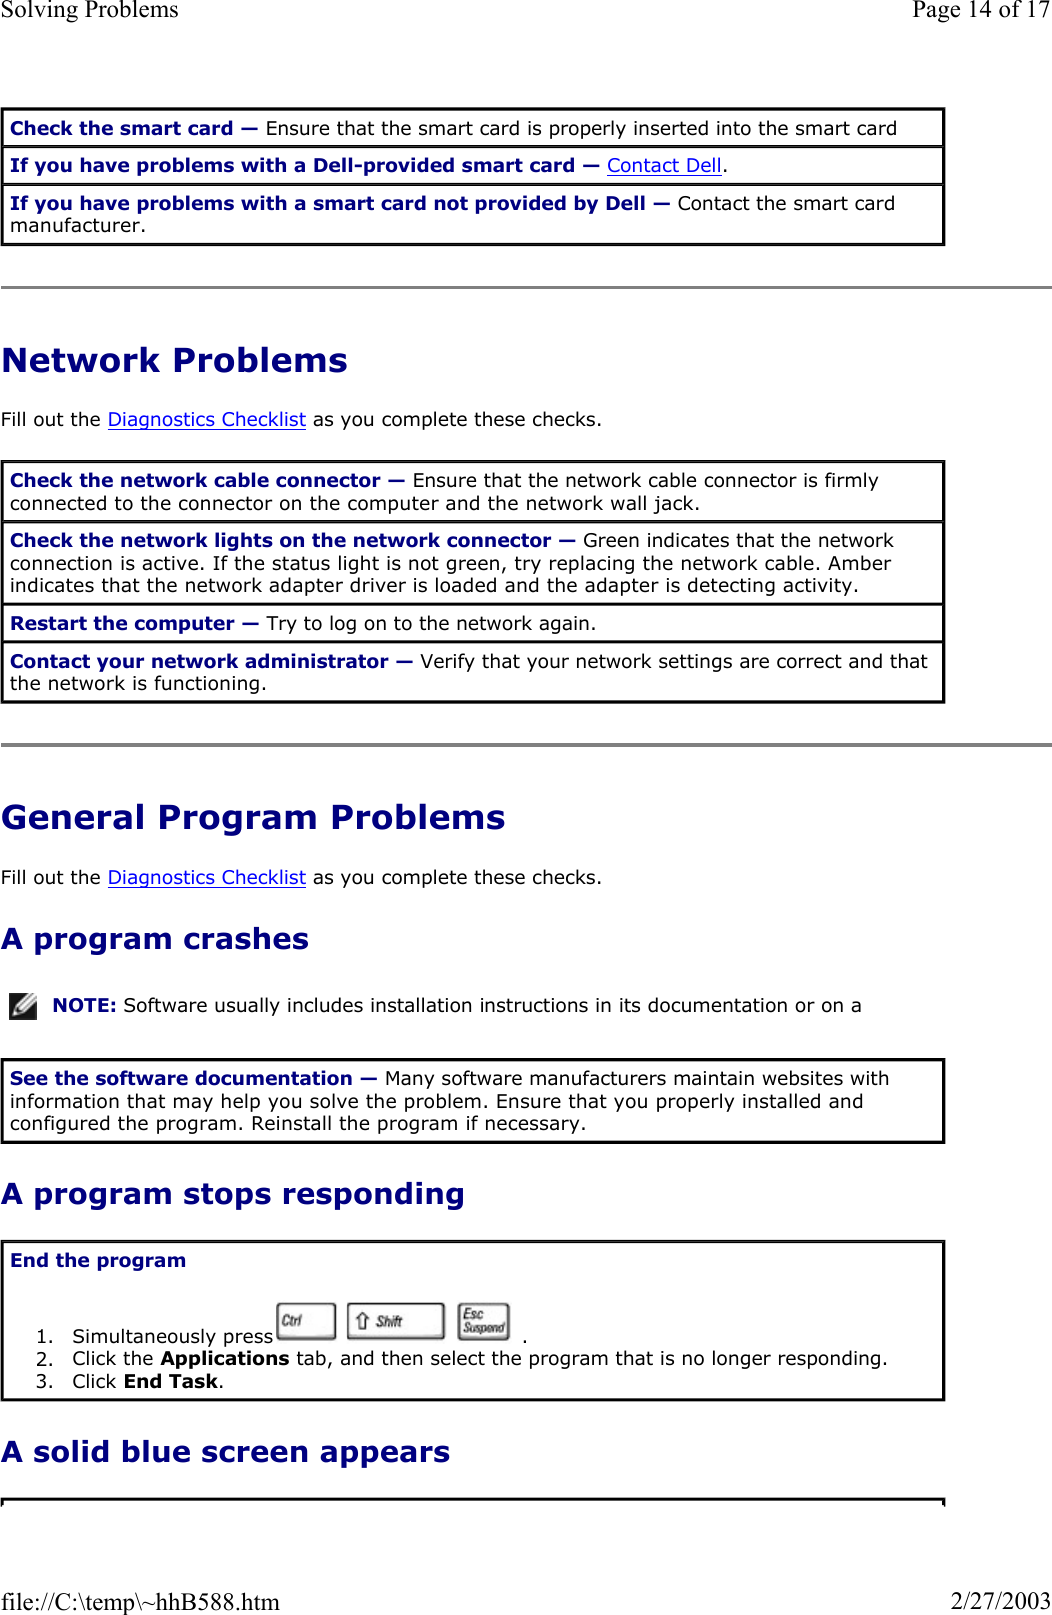 Network Problems Fill out the Diagnostics Checklist as you complete these checks. General Program Problems Fill out the Diagnostics Checklist as you complete these checks. A program crashes A program stops responding A solid blue screen appears Check the smart card — Ensure that the smart card is properly inserted into the smart card If you have problems with a Dell-provided smart card — Contact Dell.If you have problems with a smart card not provided by Dell — Contact the smart card manufacturer. Check the network cable connector — Ensure that the network cable connector is firmly connected to the connector on the computer and the network wall jack. Check the network lights on the network connector — Green indicates that the network connection is active. If the status light is not green, try replacing the network cable. Amber indicates that the network adapter driver is loaded and the adapter is detecting activity. Restart the computer — Try to log on to the network again. Contact your network administrator — Verify that your network settings are correct and that the network is functioning. NOTE: Software usually includes installation instructions in its documentation or on a See the software documentation — Many software manufacturers maintain websites with information that may help you solve the problem. Ensure that you properly installed and configured the program. Reinstall the program if necessary. End the program1. Simultaneously press       .  2. Click the Applications tab, and then select the program that is no longer responding.  3. Click End Task.Page 14 of 17Solving Problems2/27/2003file://C:\temp\~hhB588.htm